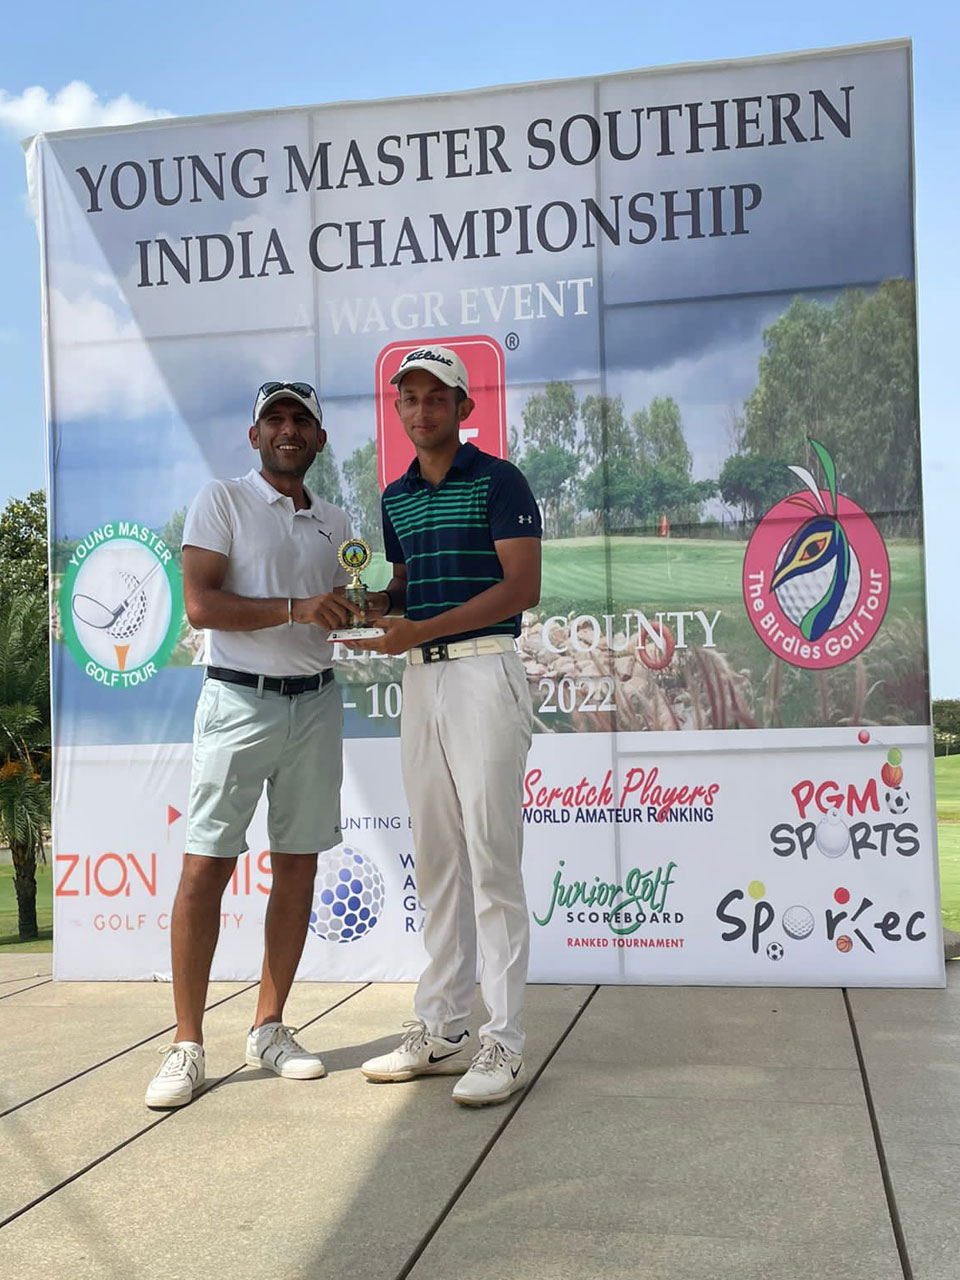 Sumit Kotwal finishes 2nd at the Young Masters Golf Championship